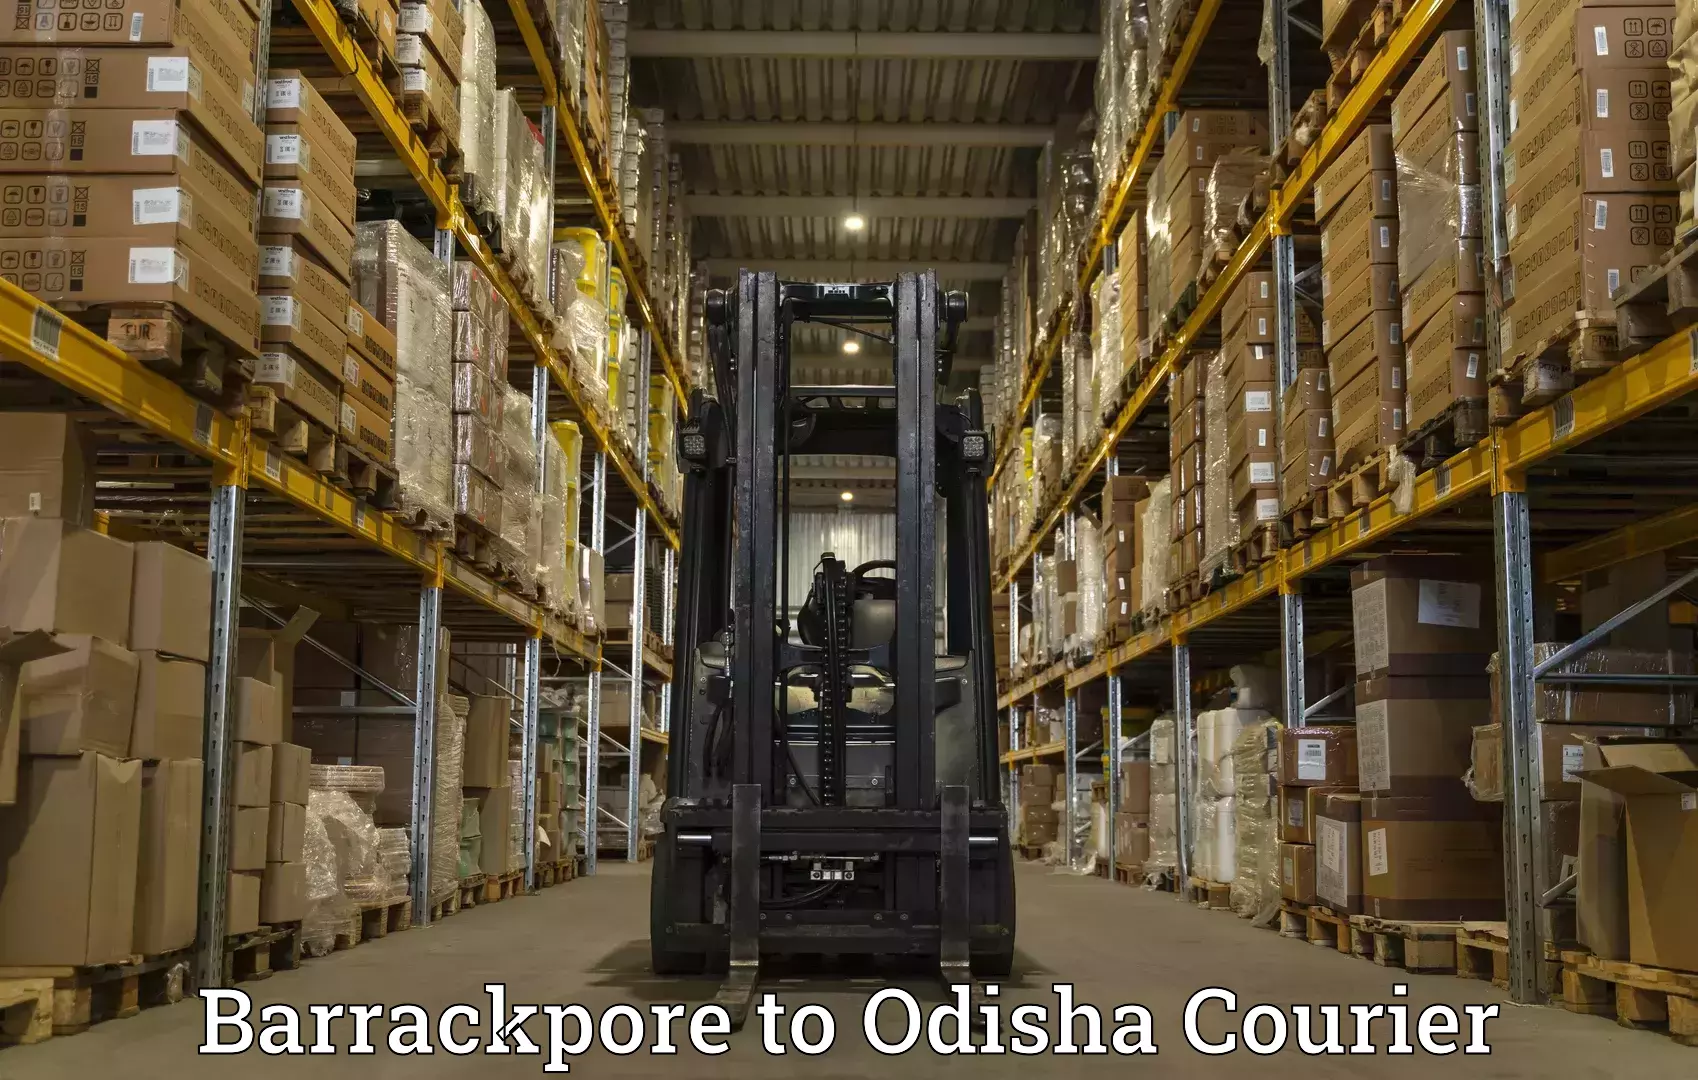 Reliable courier service in Barrackpore to Odisha